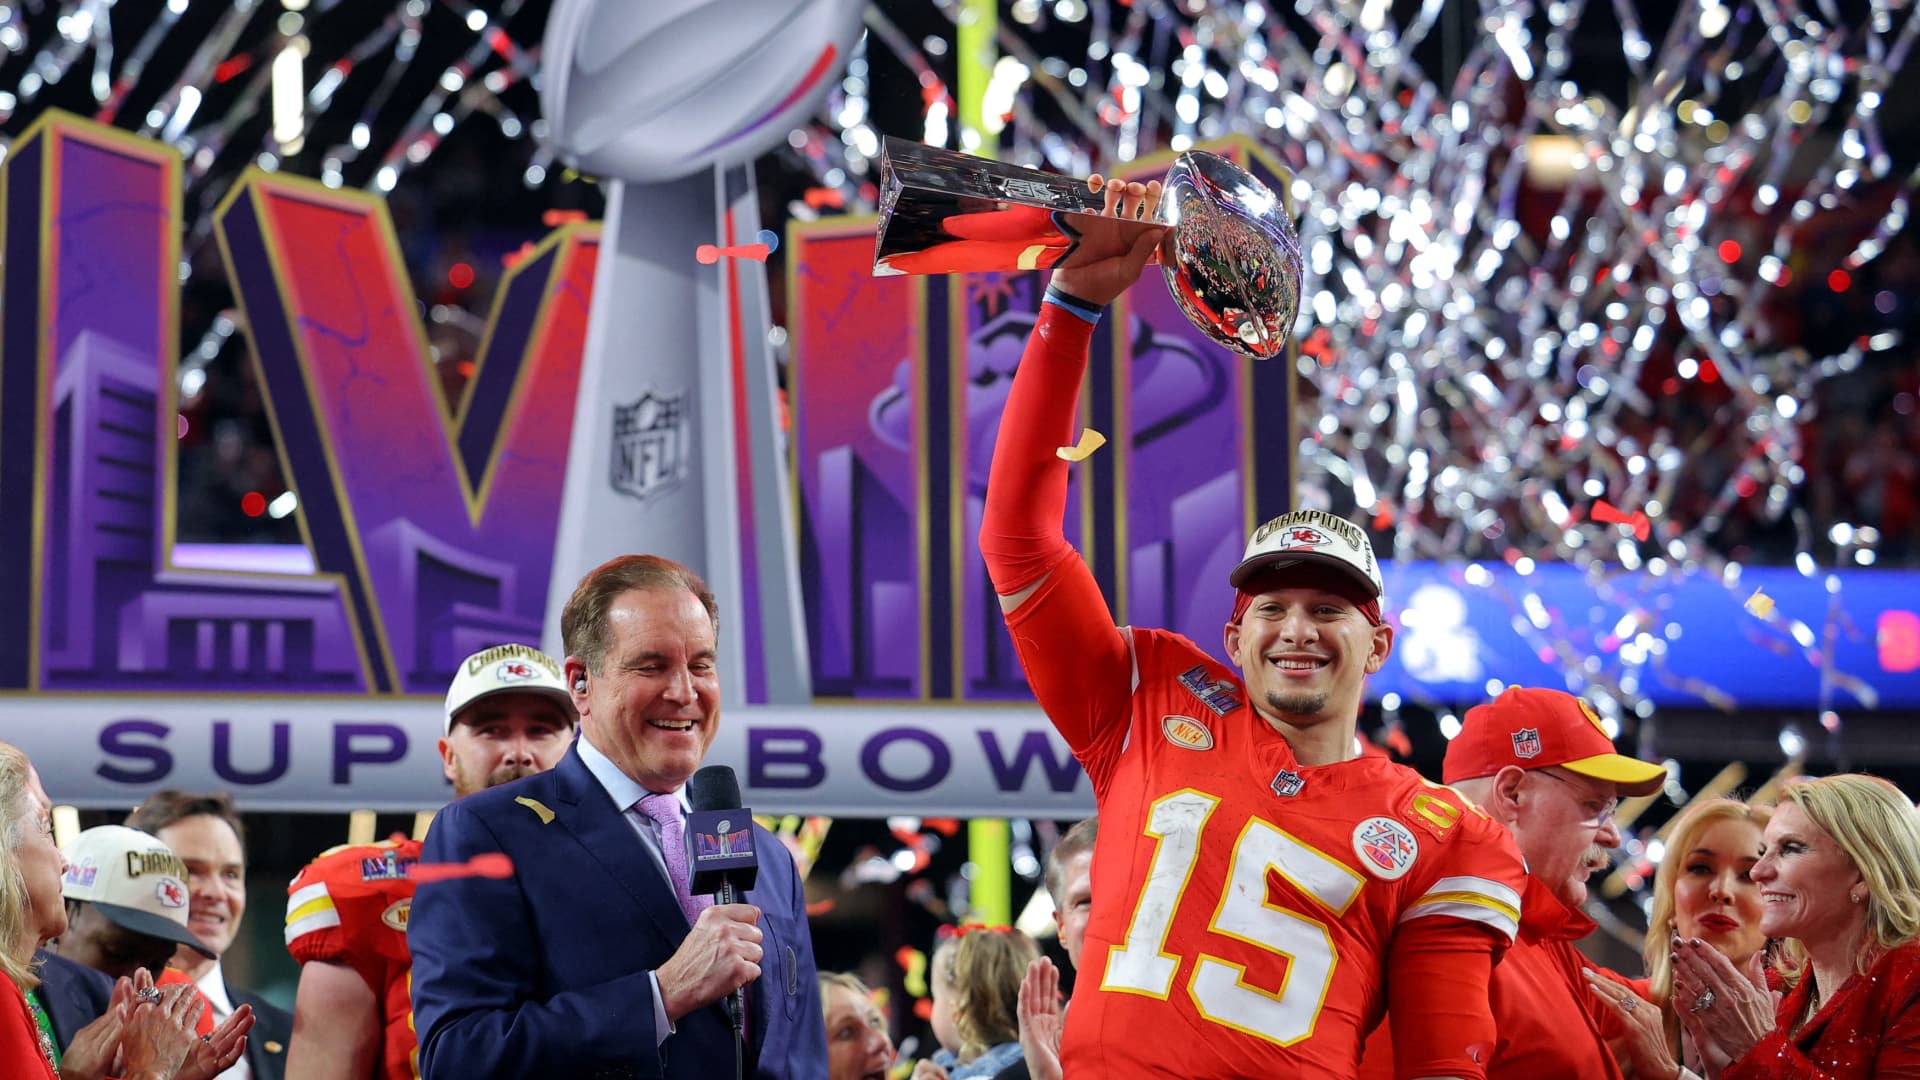 Super Bowl LVIII was the most-watched television show in history, as an estimated 123.4 million people watched the Kansas City Chiefs rally in overtim